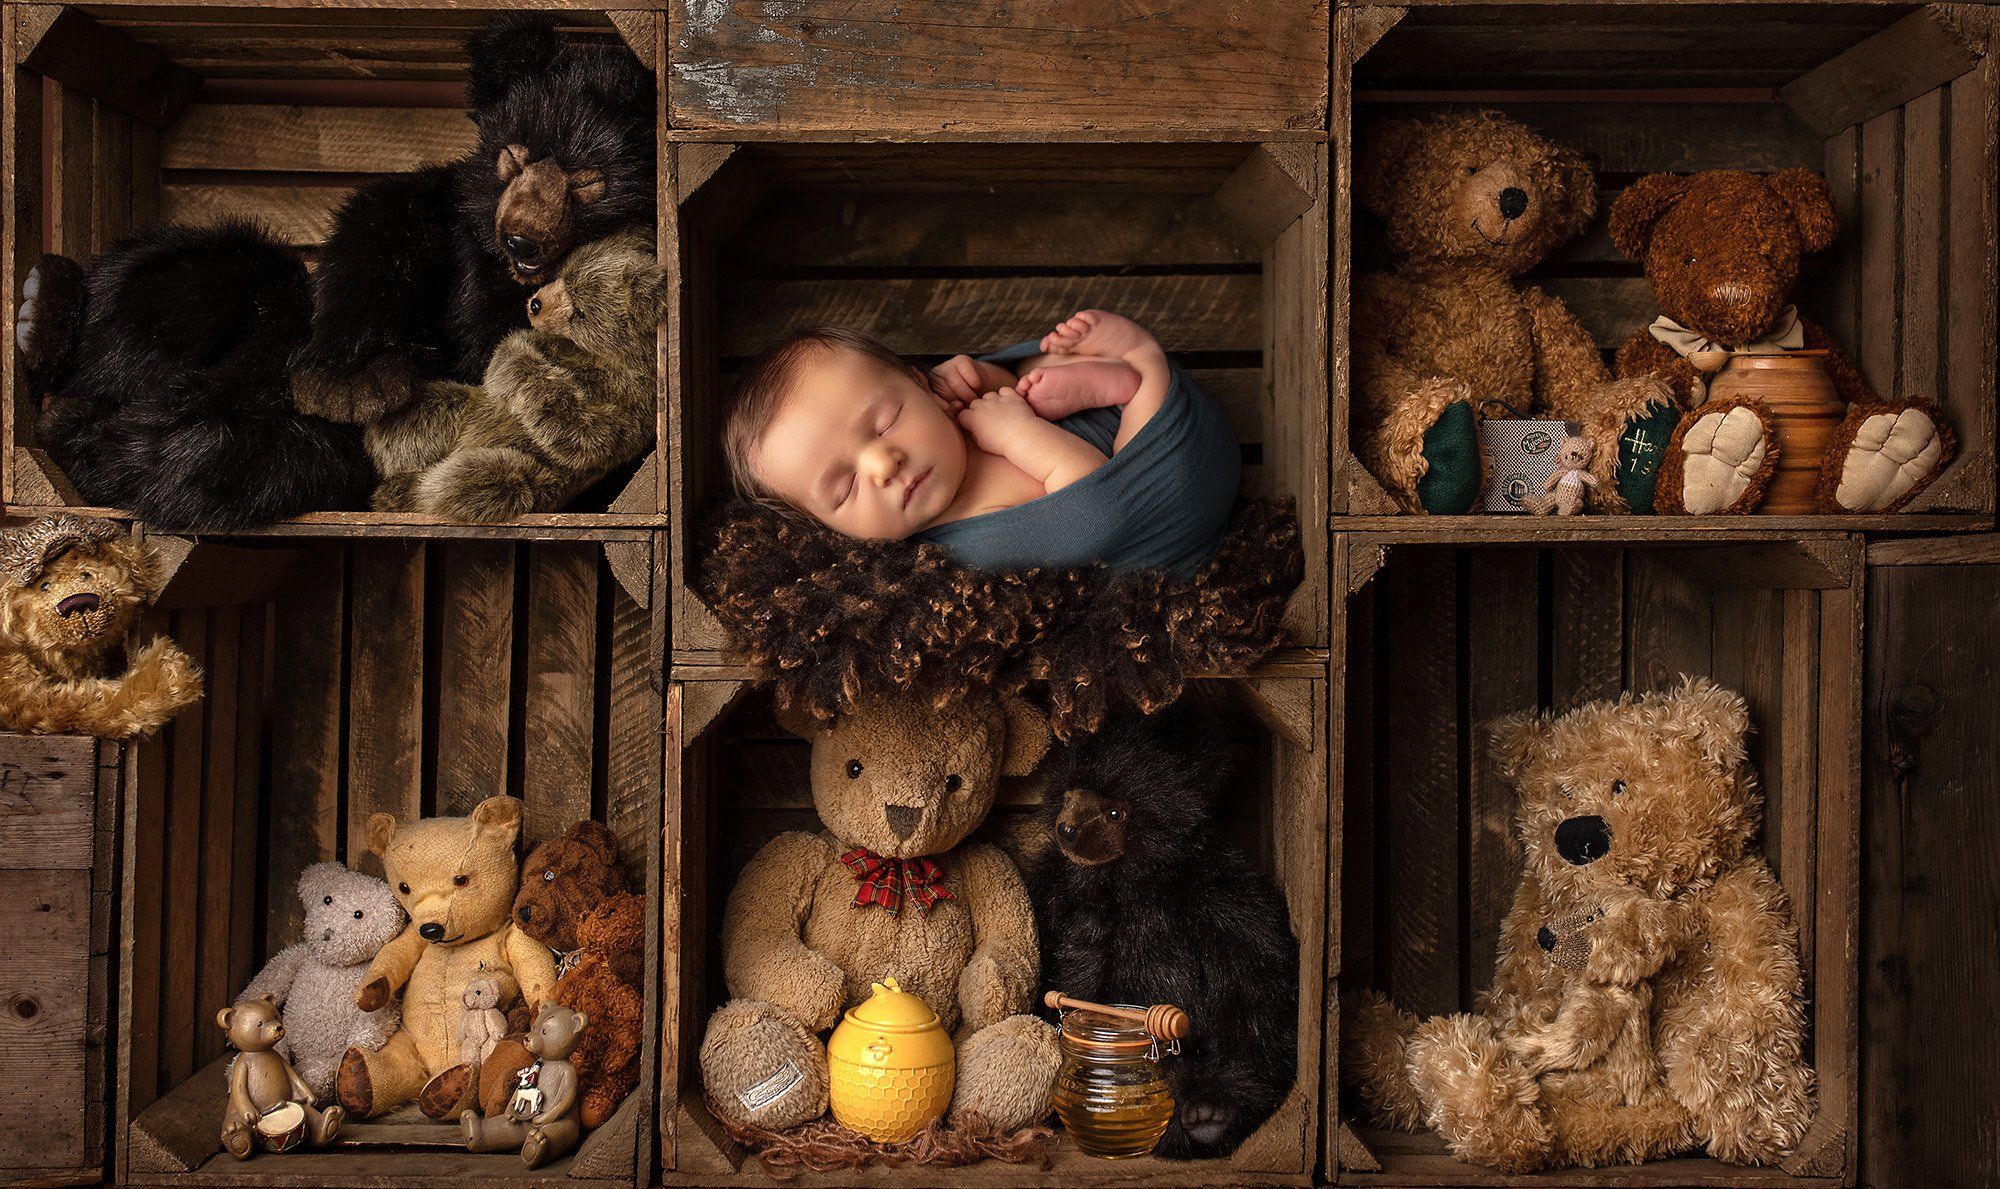 newborn baby boy tucked away in a rustic cubby full of bear stuffed animals and honey pots